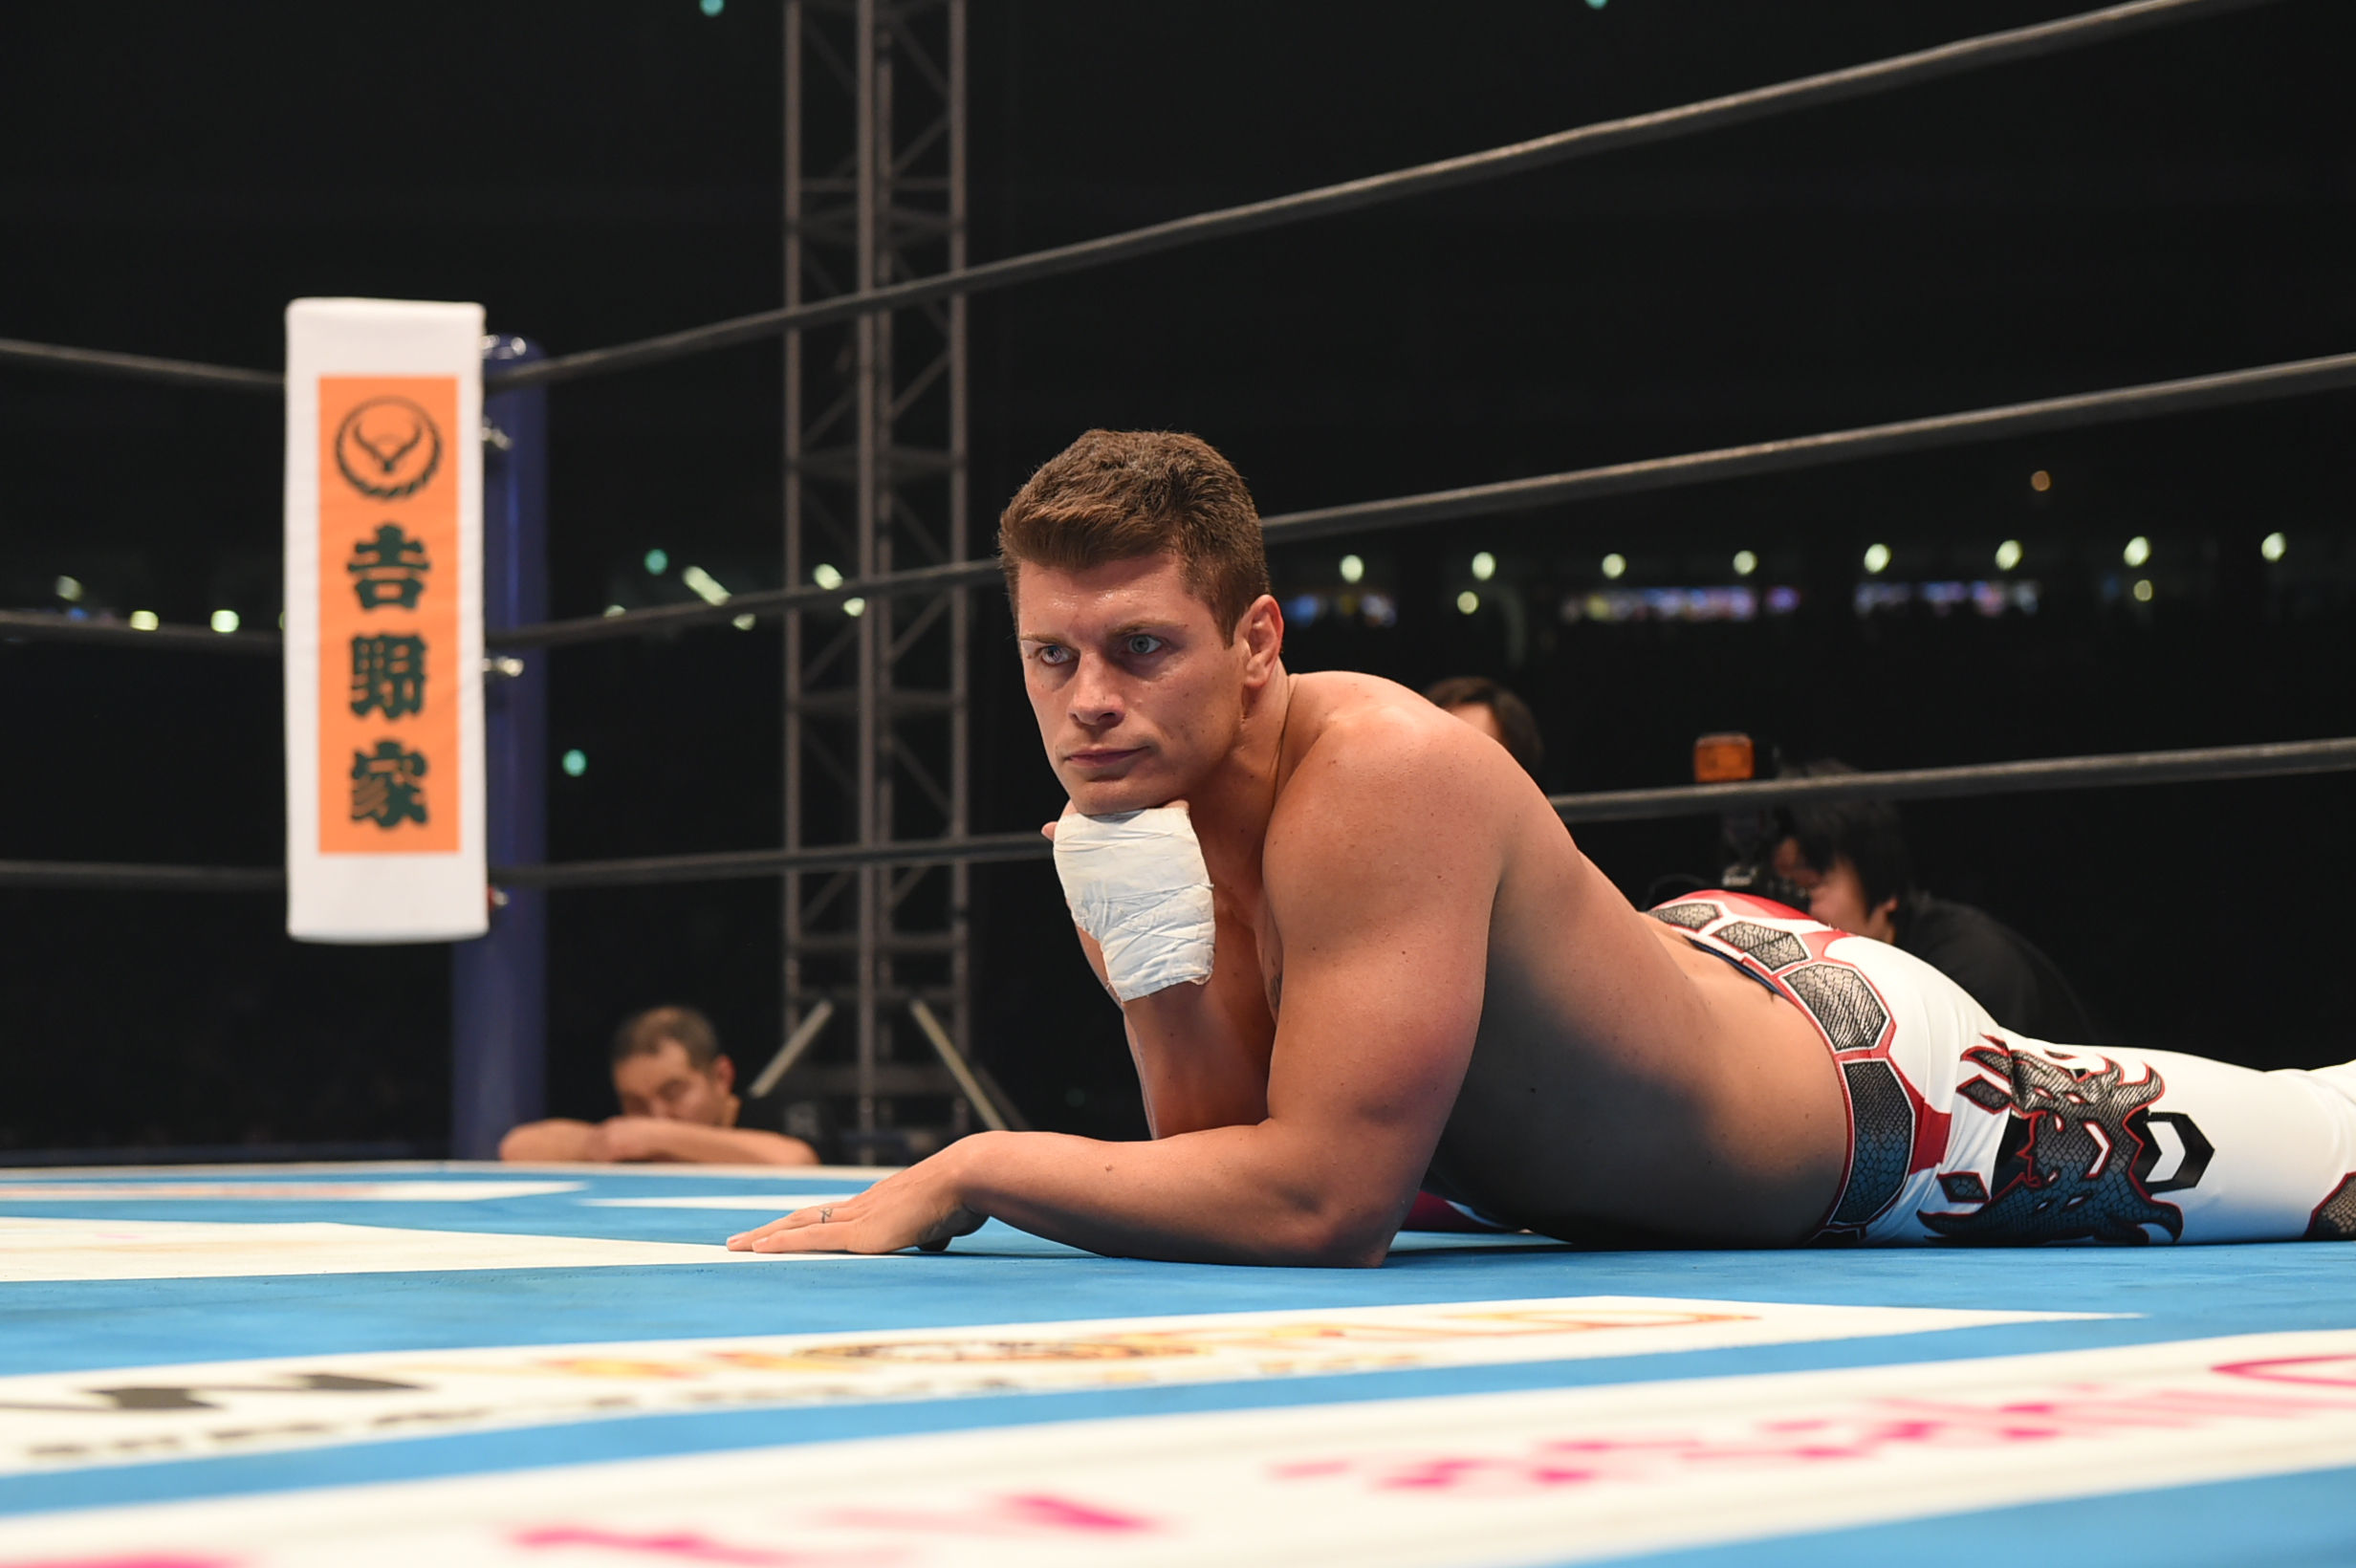 Exclusive: Cody Rhodes Confirms He Will Not Join His Brother Dustin Ringside At WarGames; Comments On Match